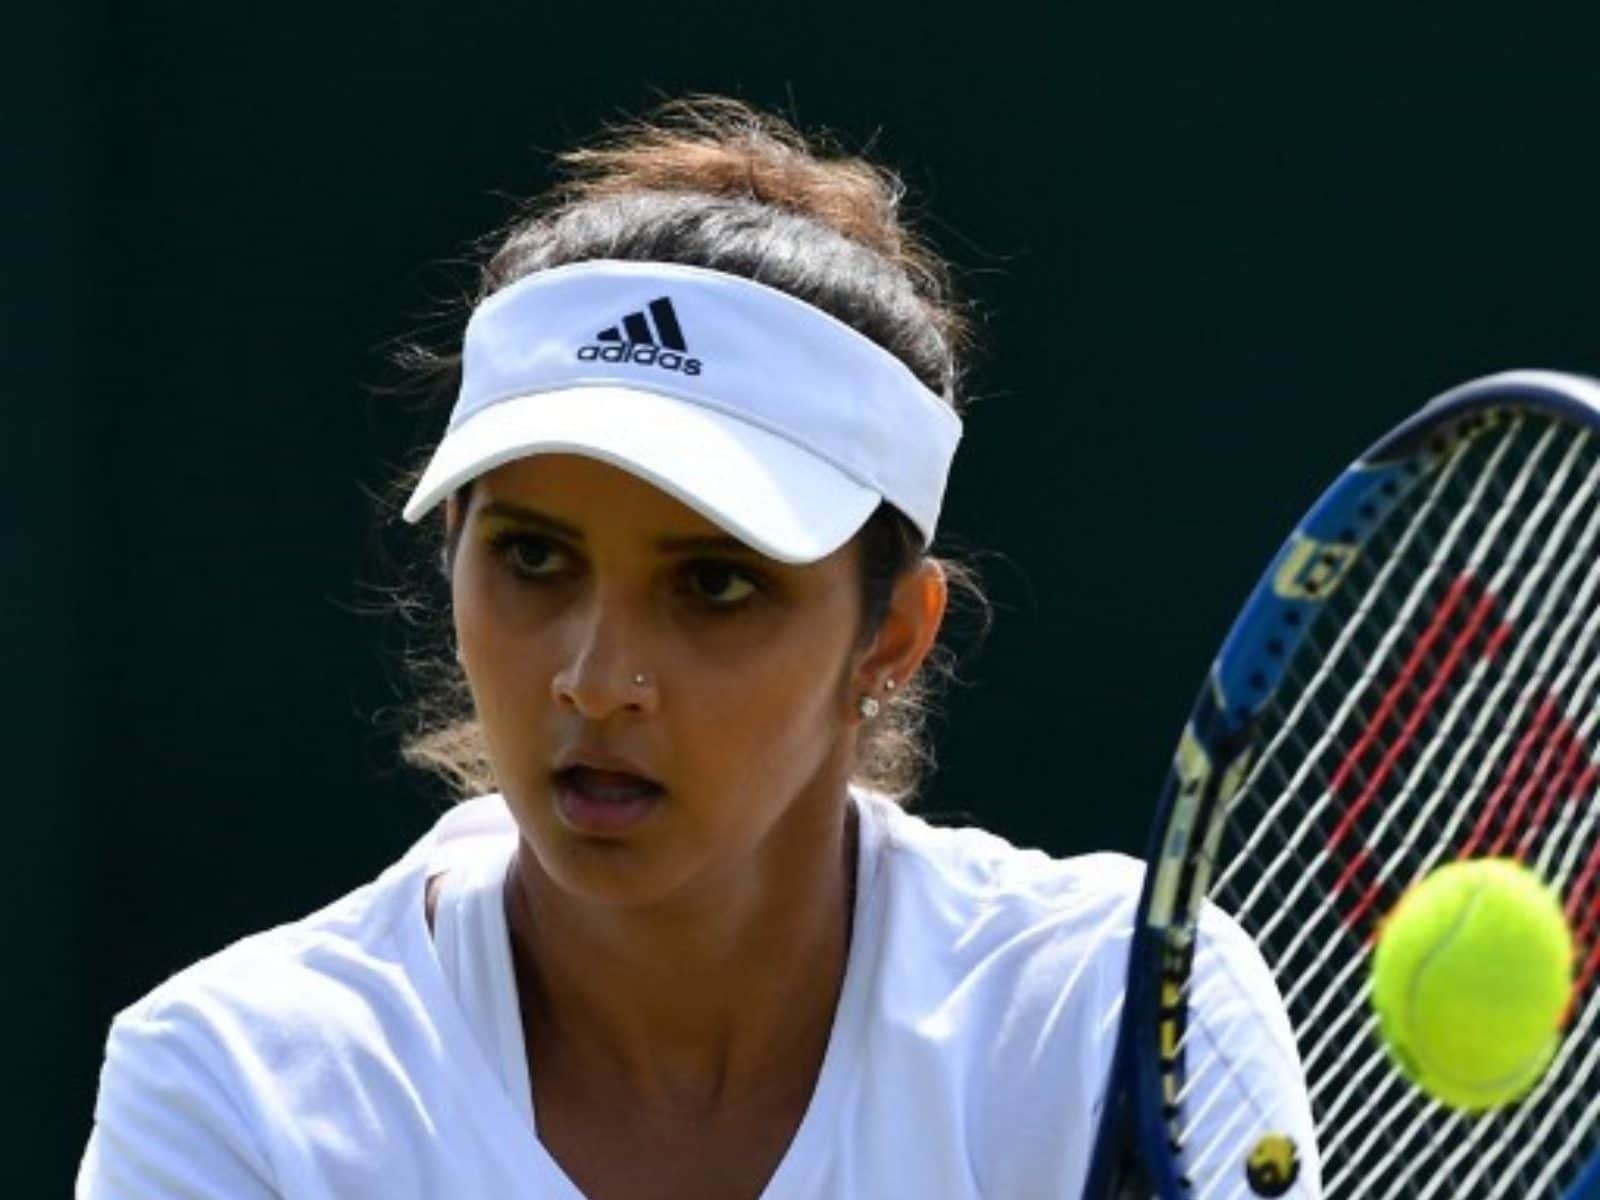 Coming back from injury will be tough for Rafael Nadal': Sania Mirza